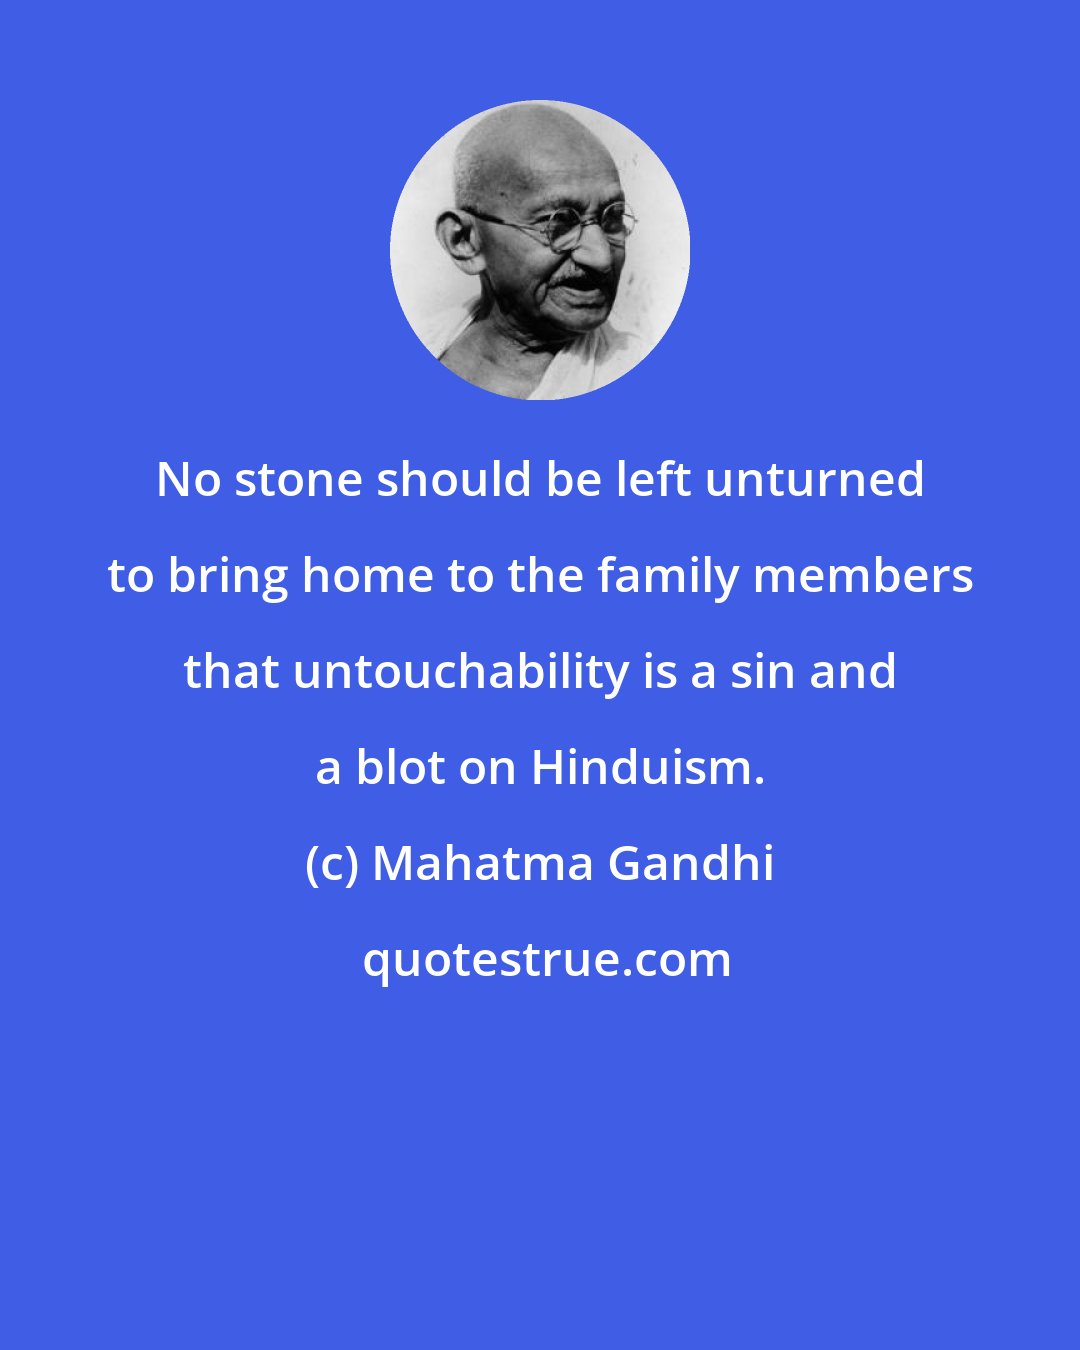 Mahatma Gandhi: No stone should be left unturned to bring home to the family members that untouchability is a sin and a blot on Hinduism.